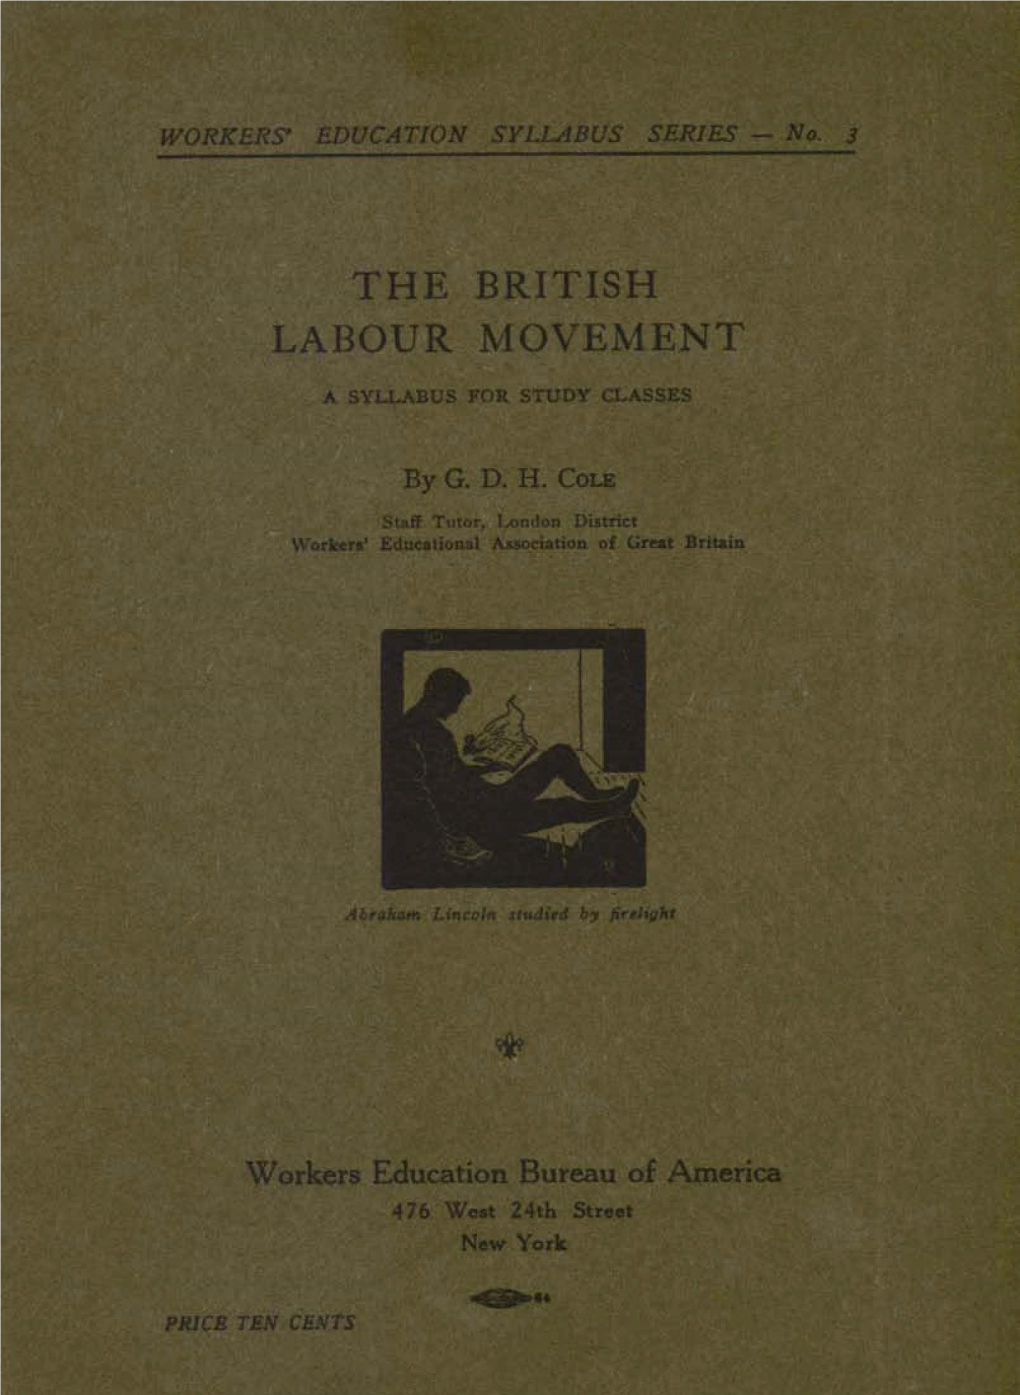 The British Labour Movement Has Developed in the Period Since the Industrial Revolution of the Eighteenth Century